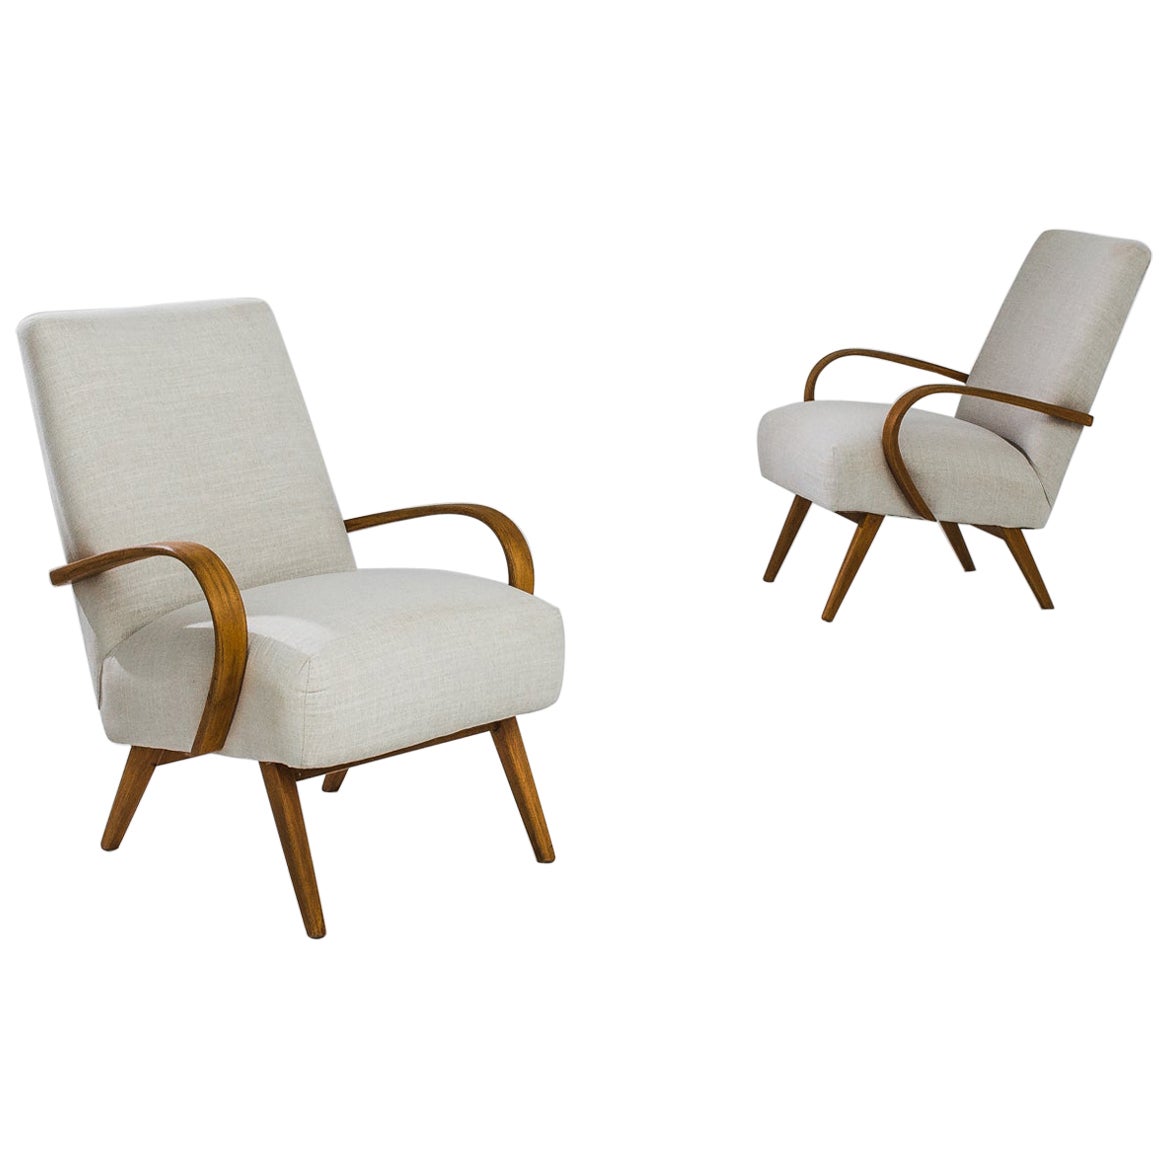 1950s Czech Beige Upholstered Armchairs, a Pair